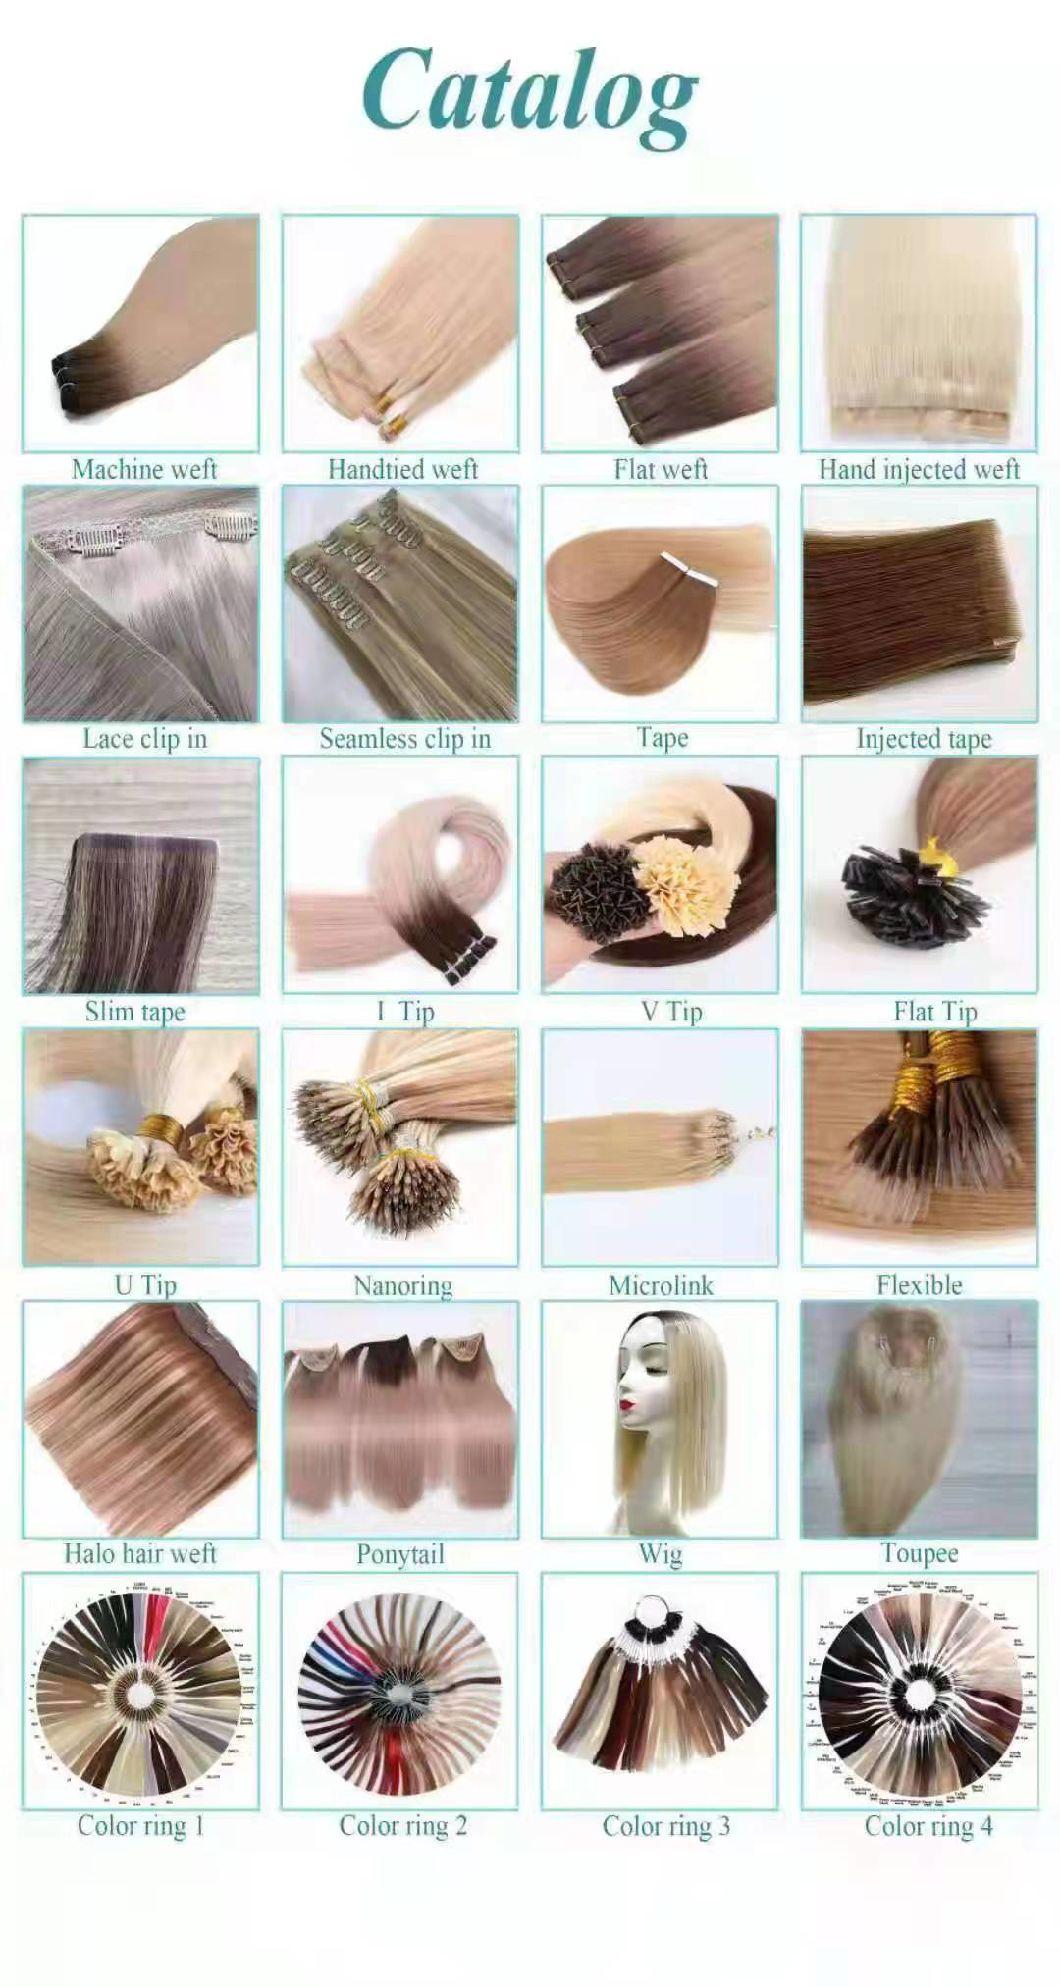 High Quality Thick Clip in Hair Extension 100% Human Hair, Invisible Remy Clip in Hair Extension